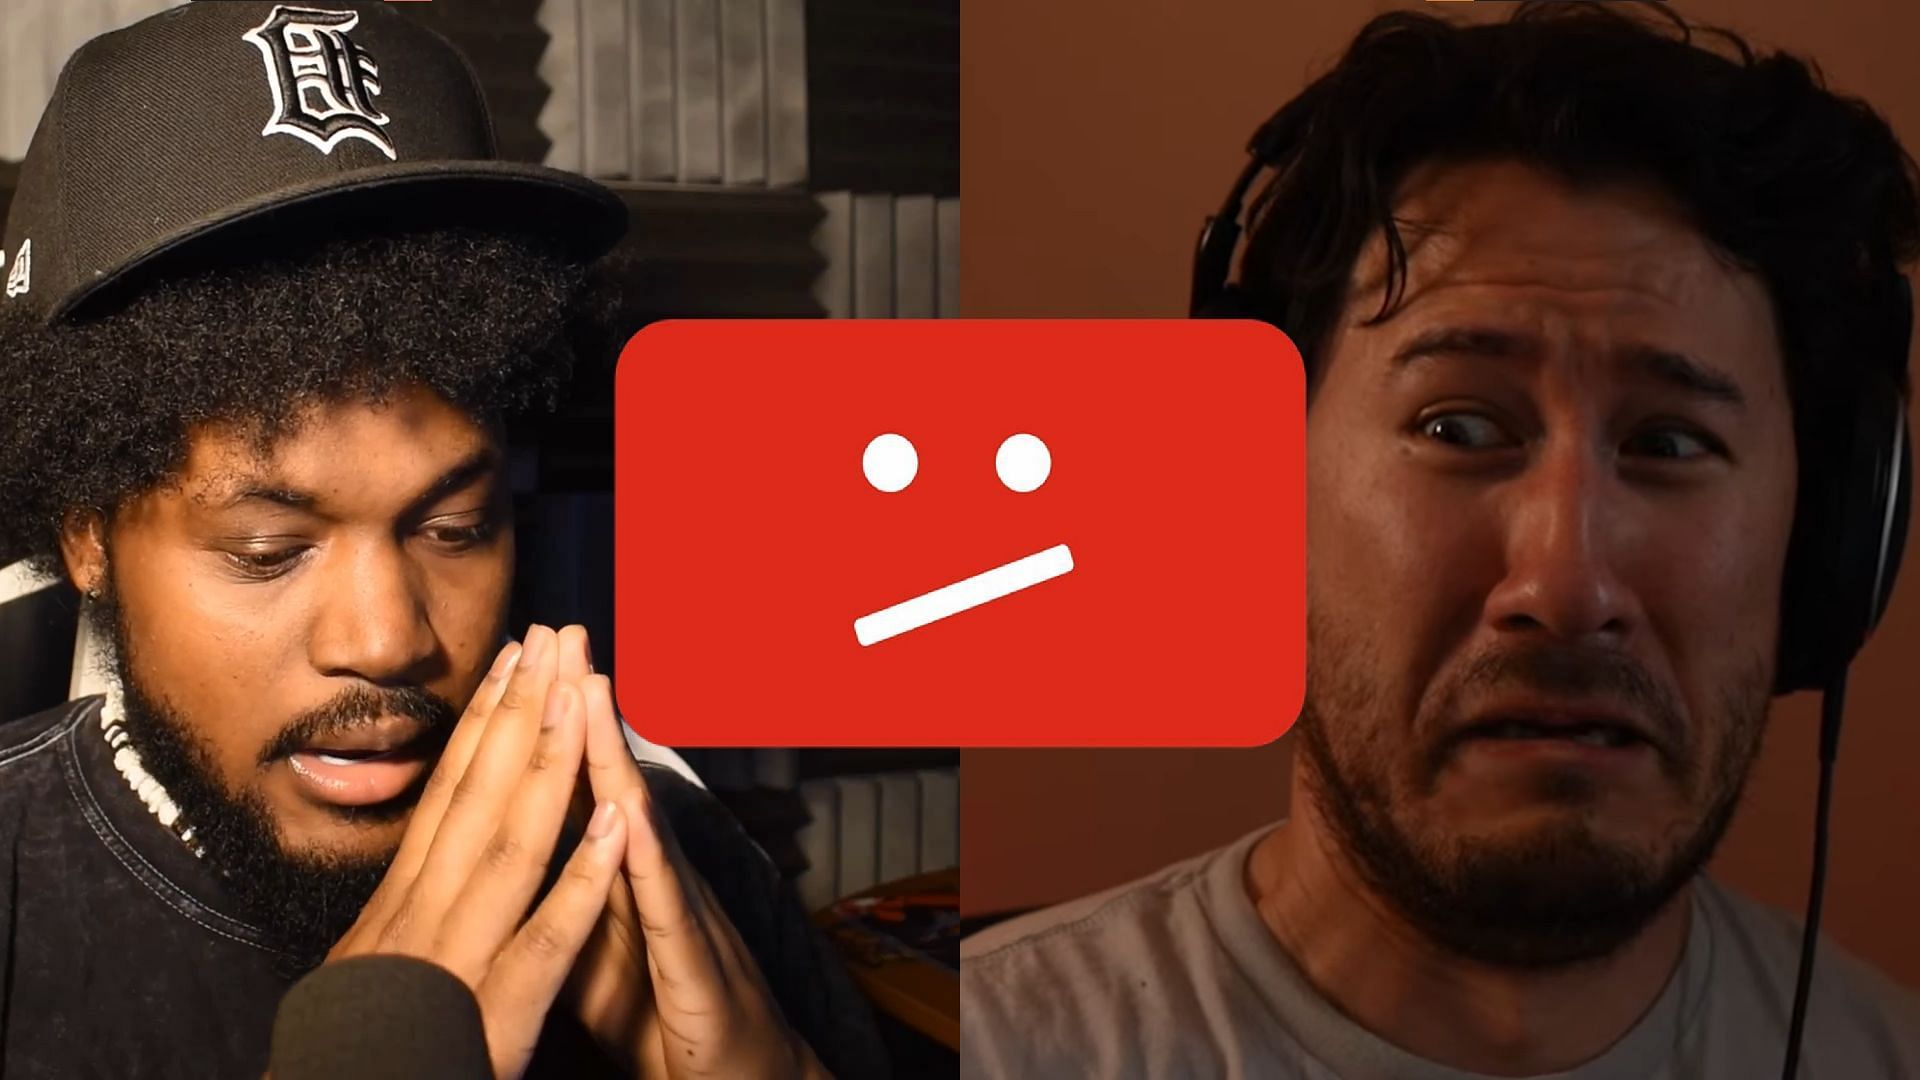 Days after CoryxKenshin accused YouTube of playing favorites and/or being r...